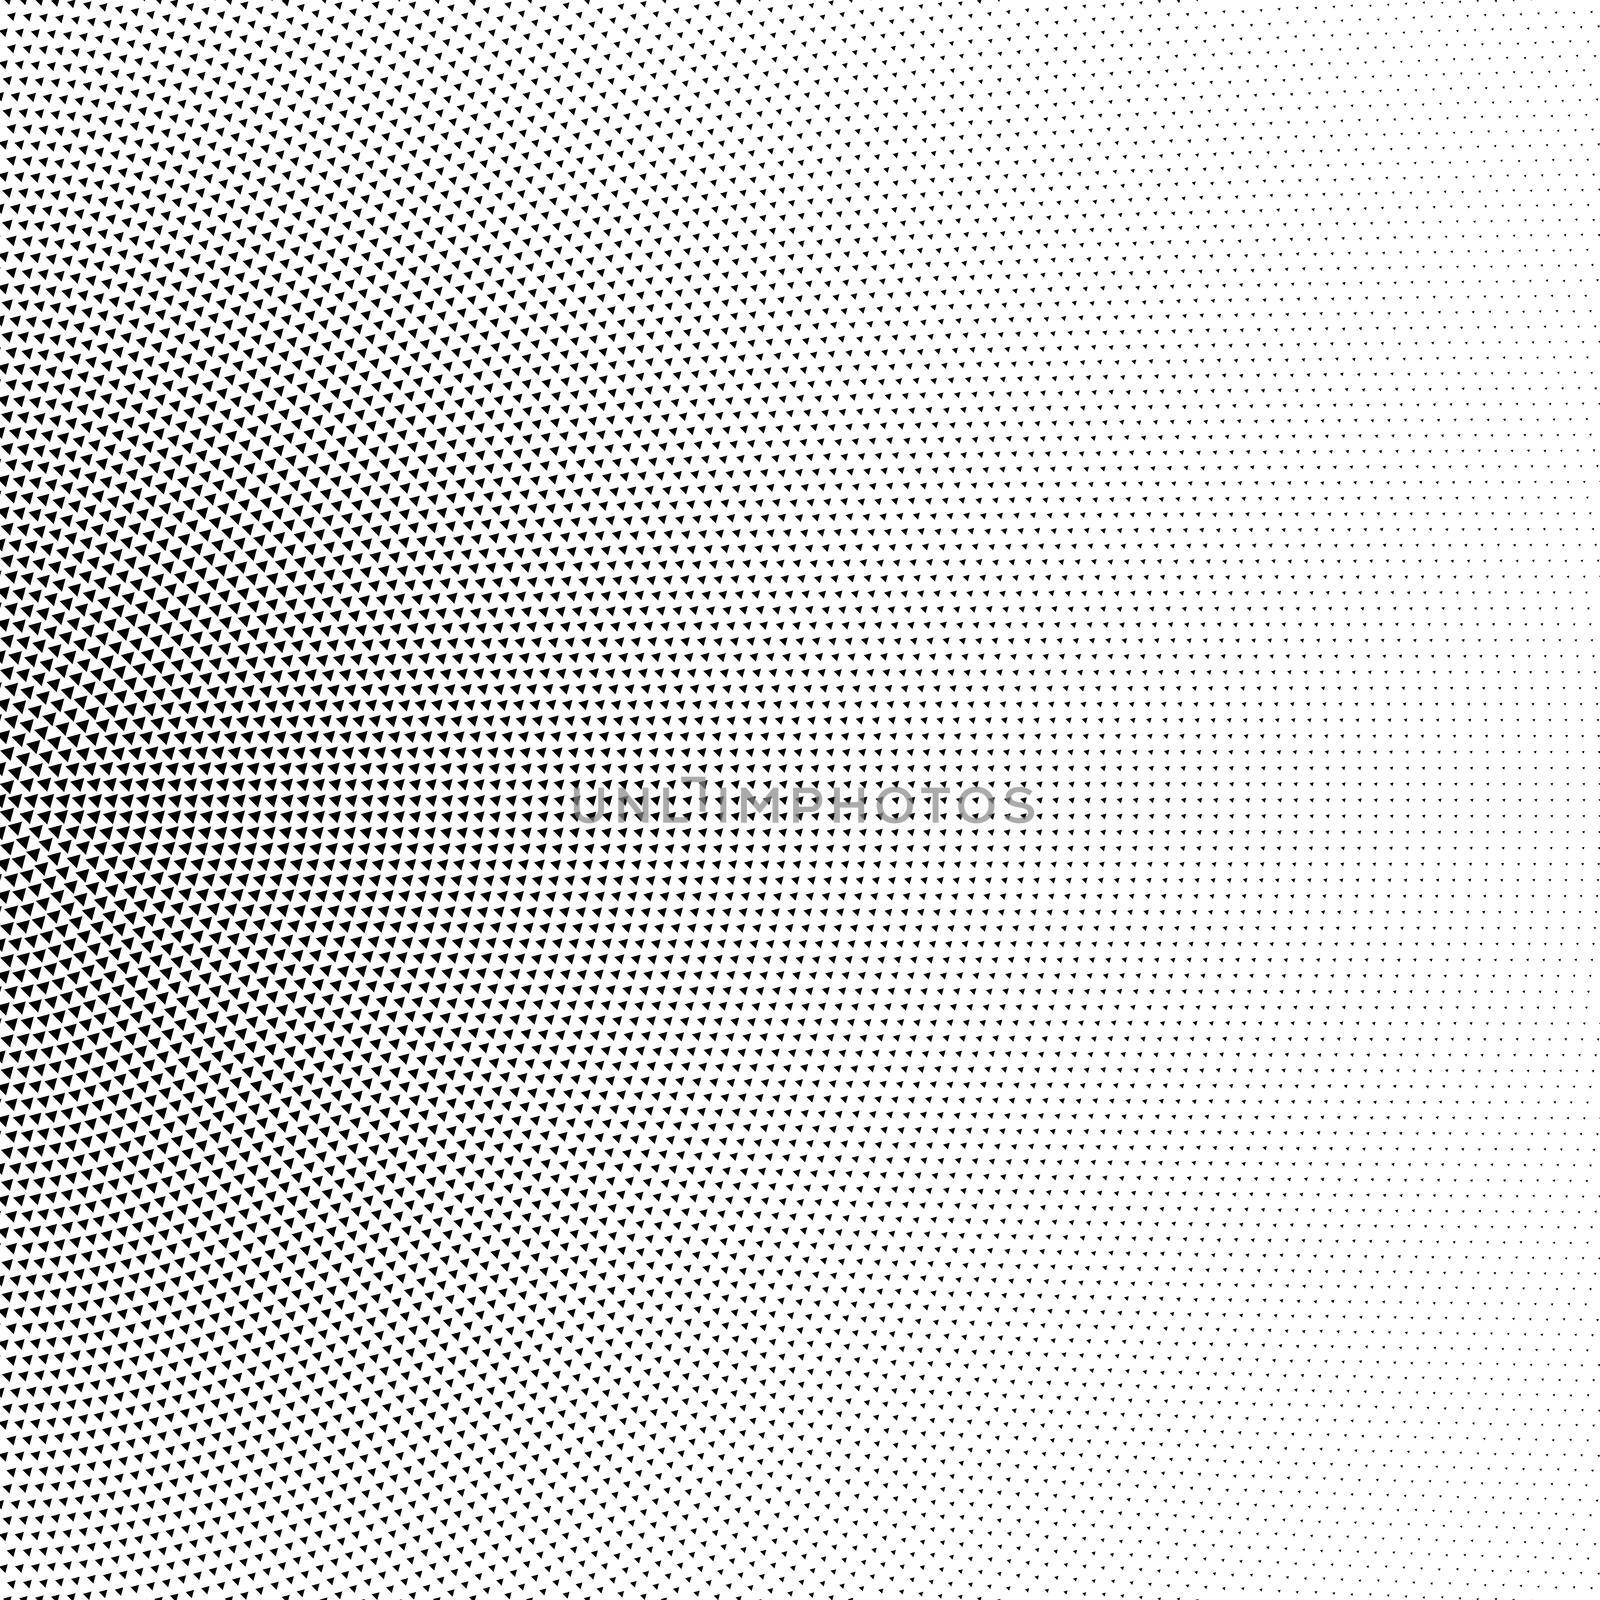 Halftone half circle made of triangles by dutourdumonde